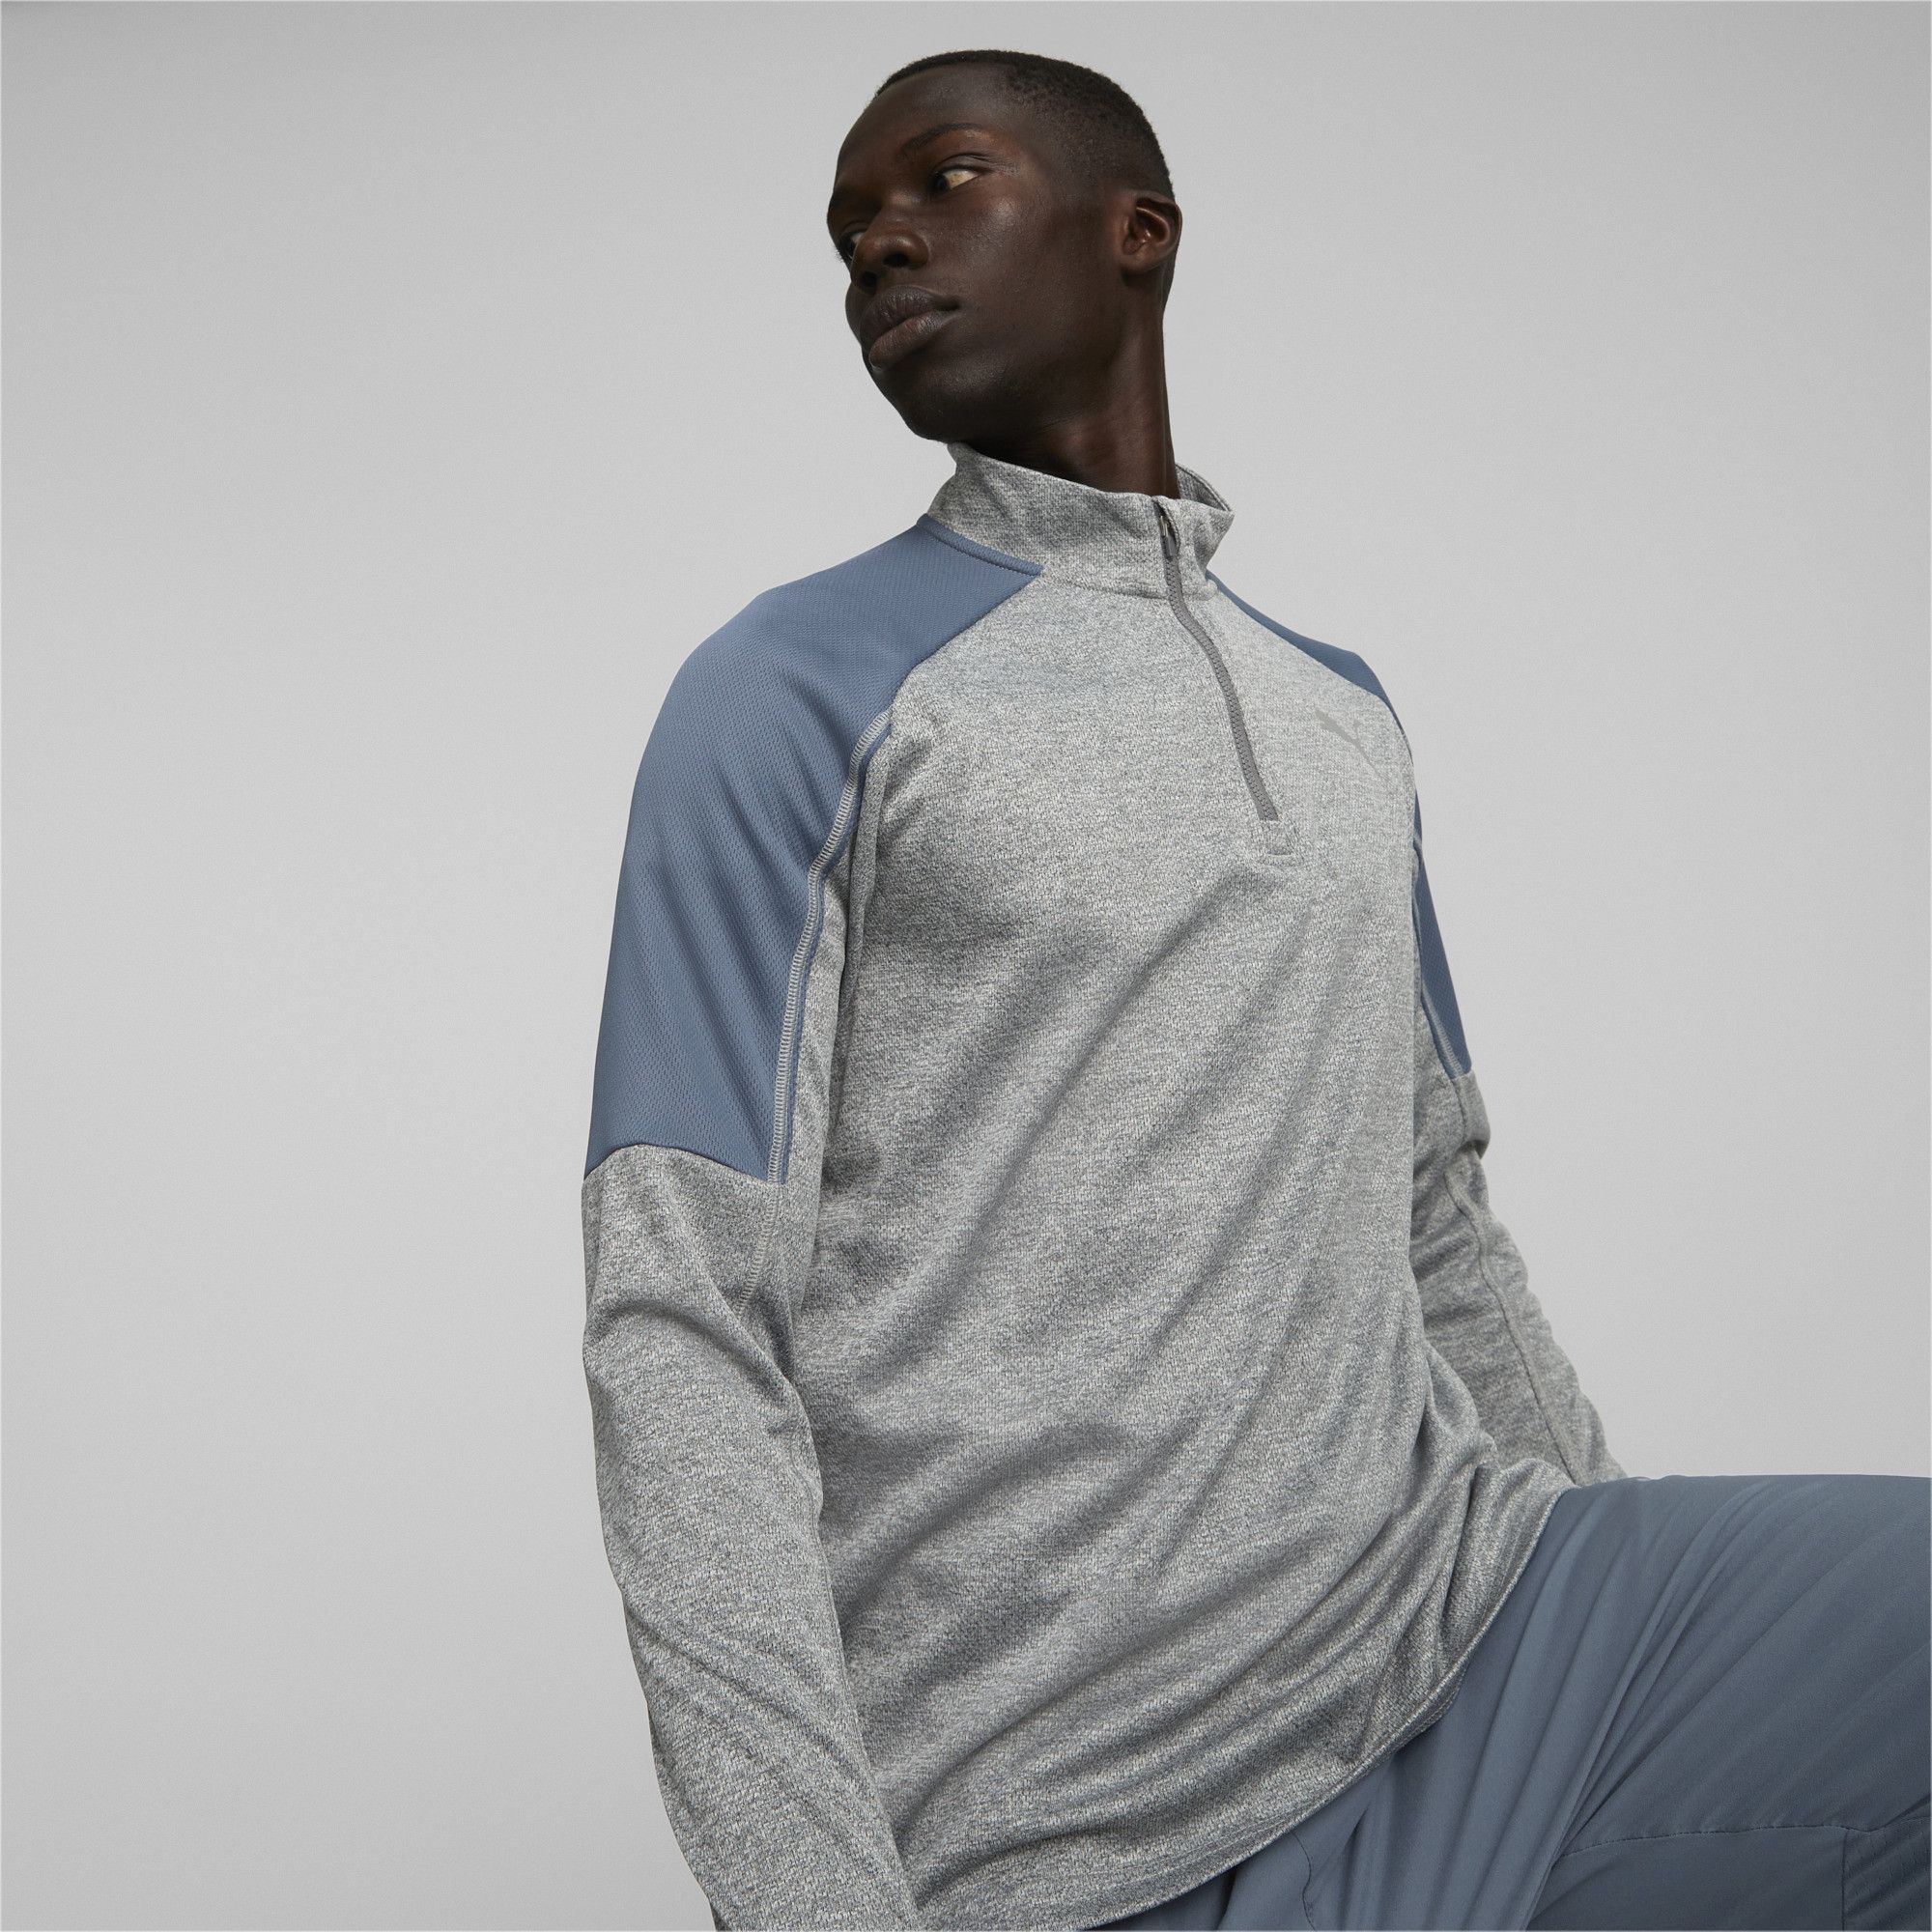 PRODUCT STORY Explore the upper limits of possibility with our performance running line. Our Quarter-Zip Long Sleeve Running Tee is an ideal addition to any runner's arsenal, featuring crisp, clean details and the latest in our dryCELL moisture wicking technology to keep you cool and dry – from your first stride to your last. FEATURES & BENEFITS dryCELL: Performance technology designed to wick moisture from the body and keep you free of sweat during exerciseRecycled Content: Made with at least 20% recycled material as a step toward a better future DETAILS Regular fitRaised collar with quarter-zip closurePUMA Cat Logo at left chest